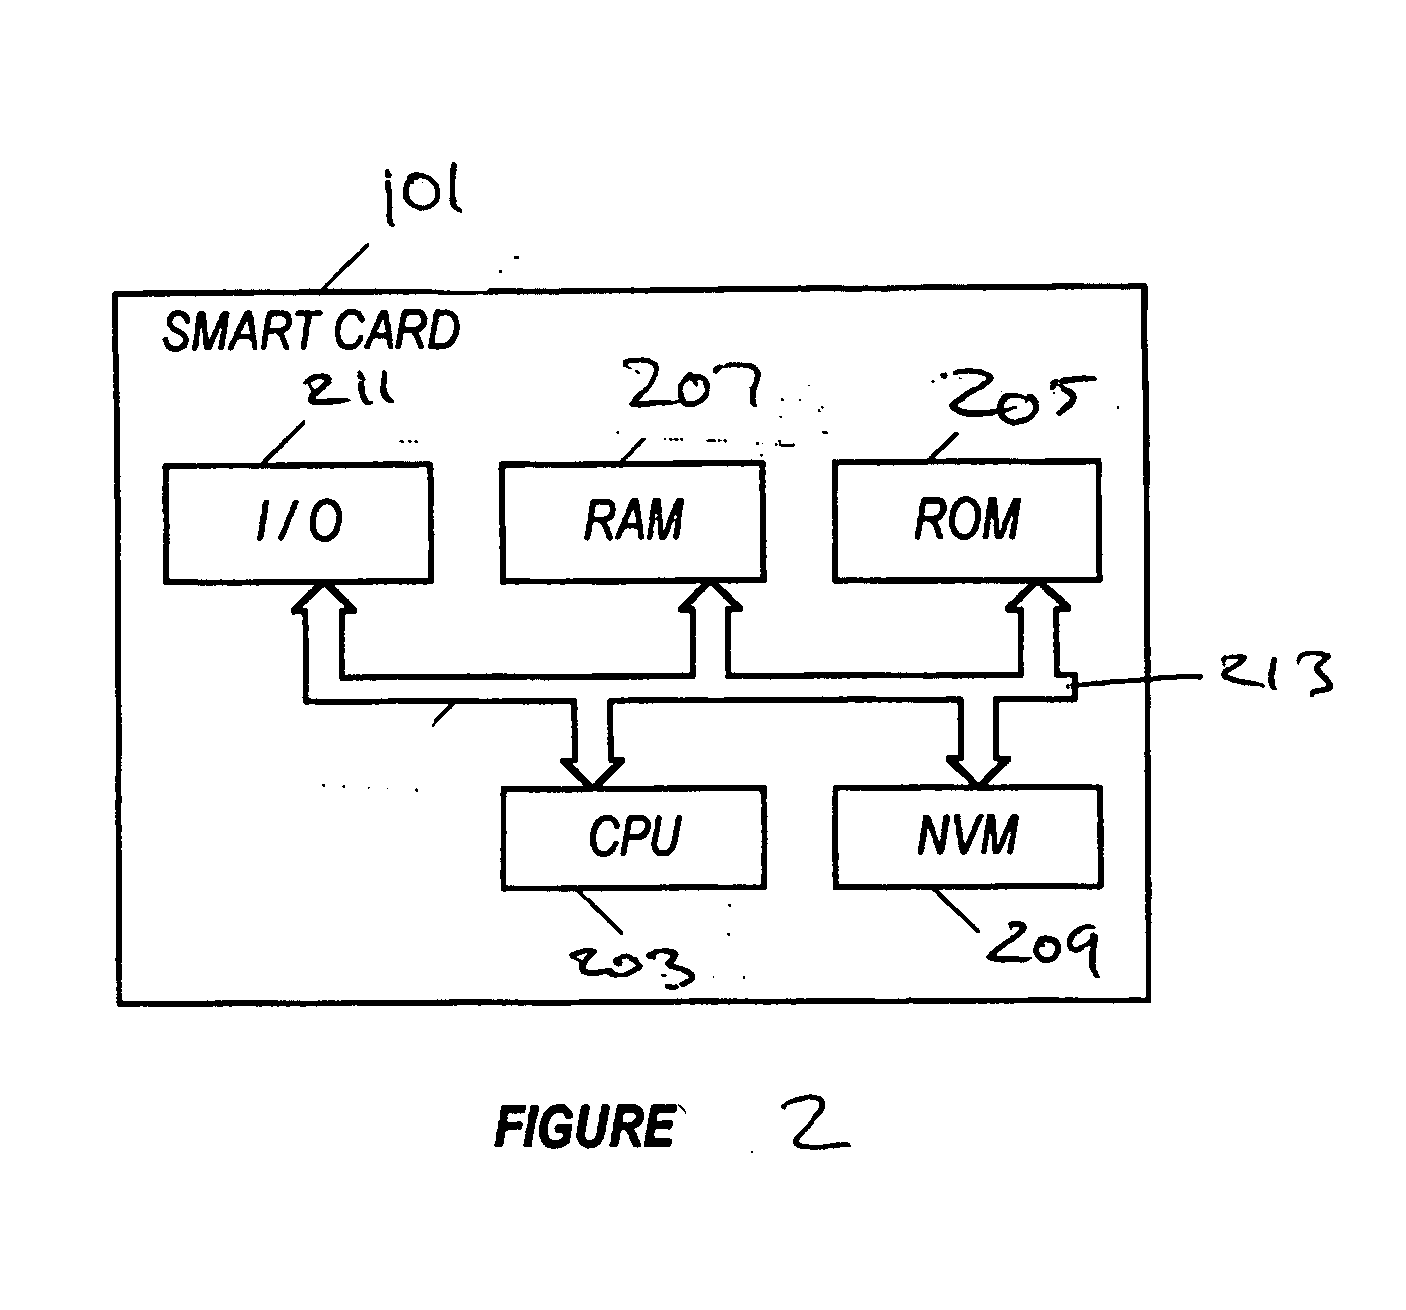 Method and system for end-to-end communication between a universal integrated circuit card and a remote entity over an IP-based wireless wide area network and the internet